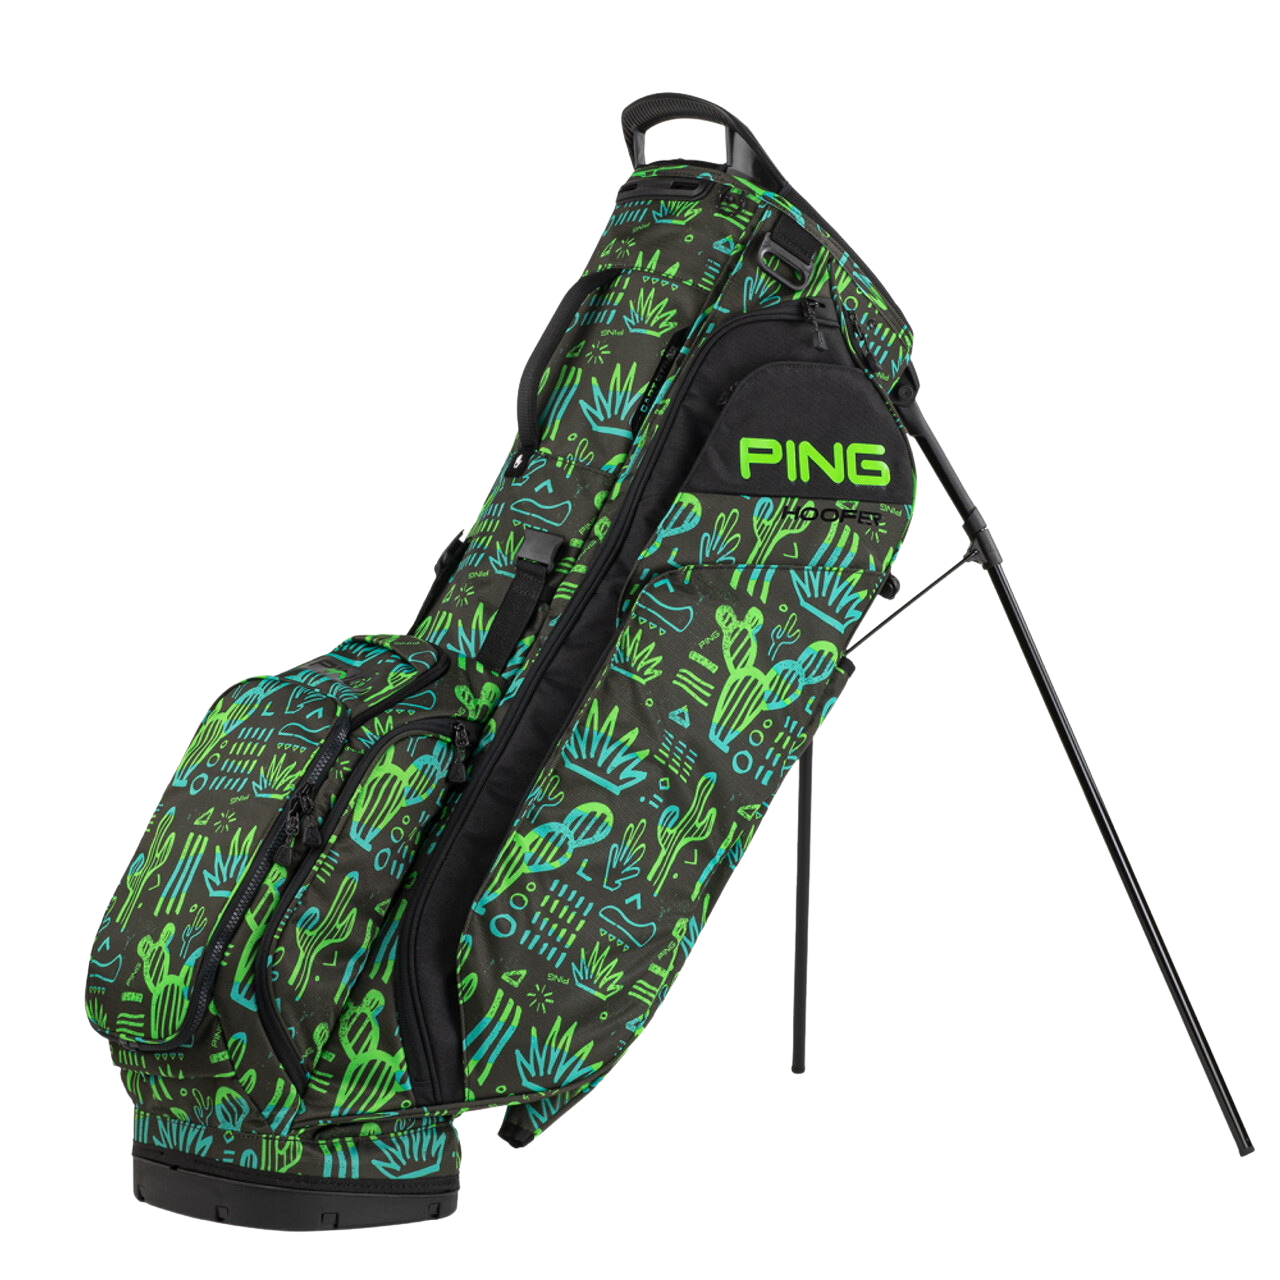 Ping Hoofer 231 Stand Bag